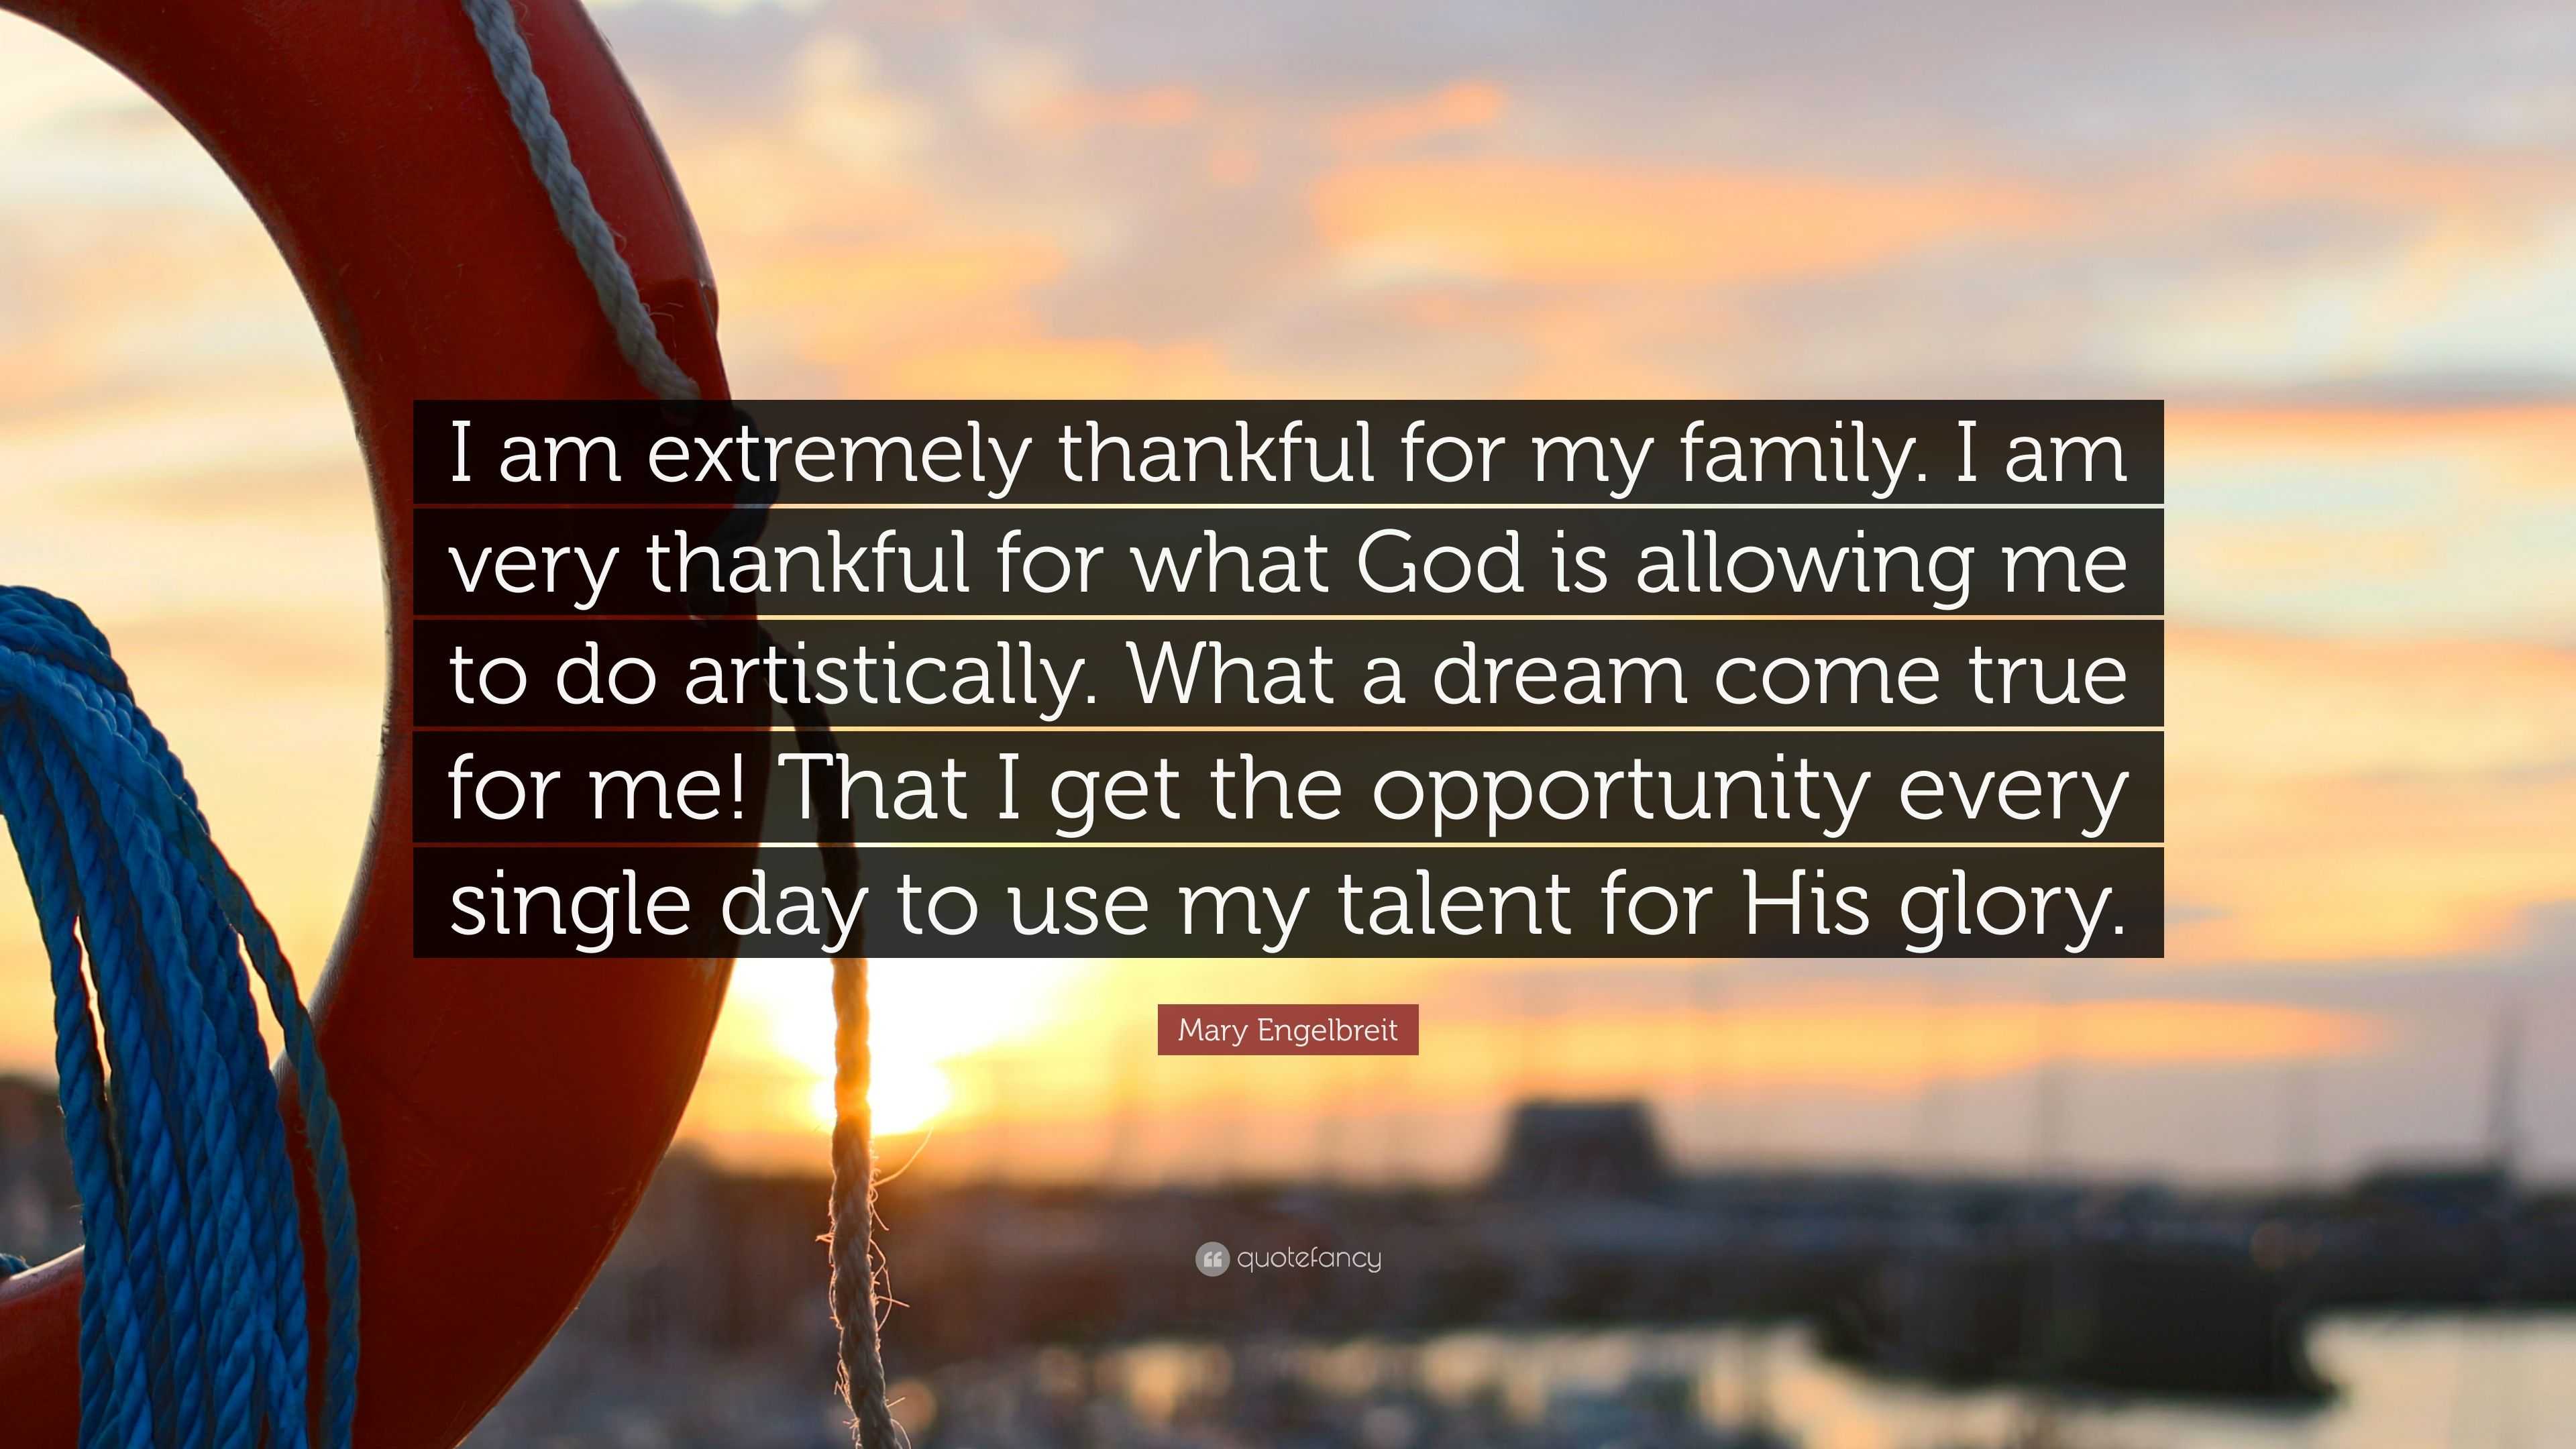 Mary Engelbreit Quote: “I am extremely thankful for my family. I